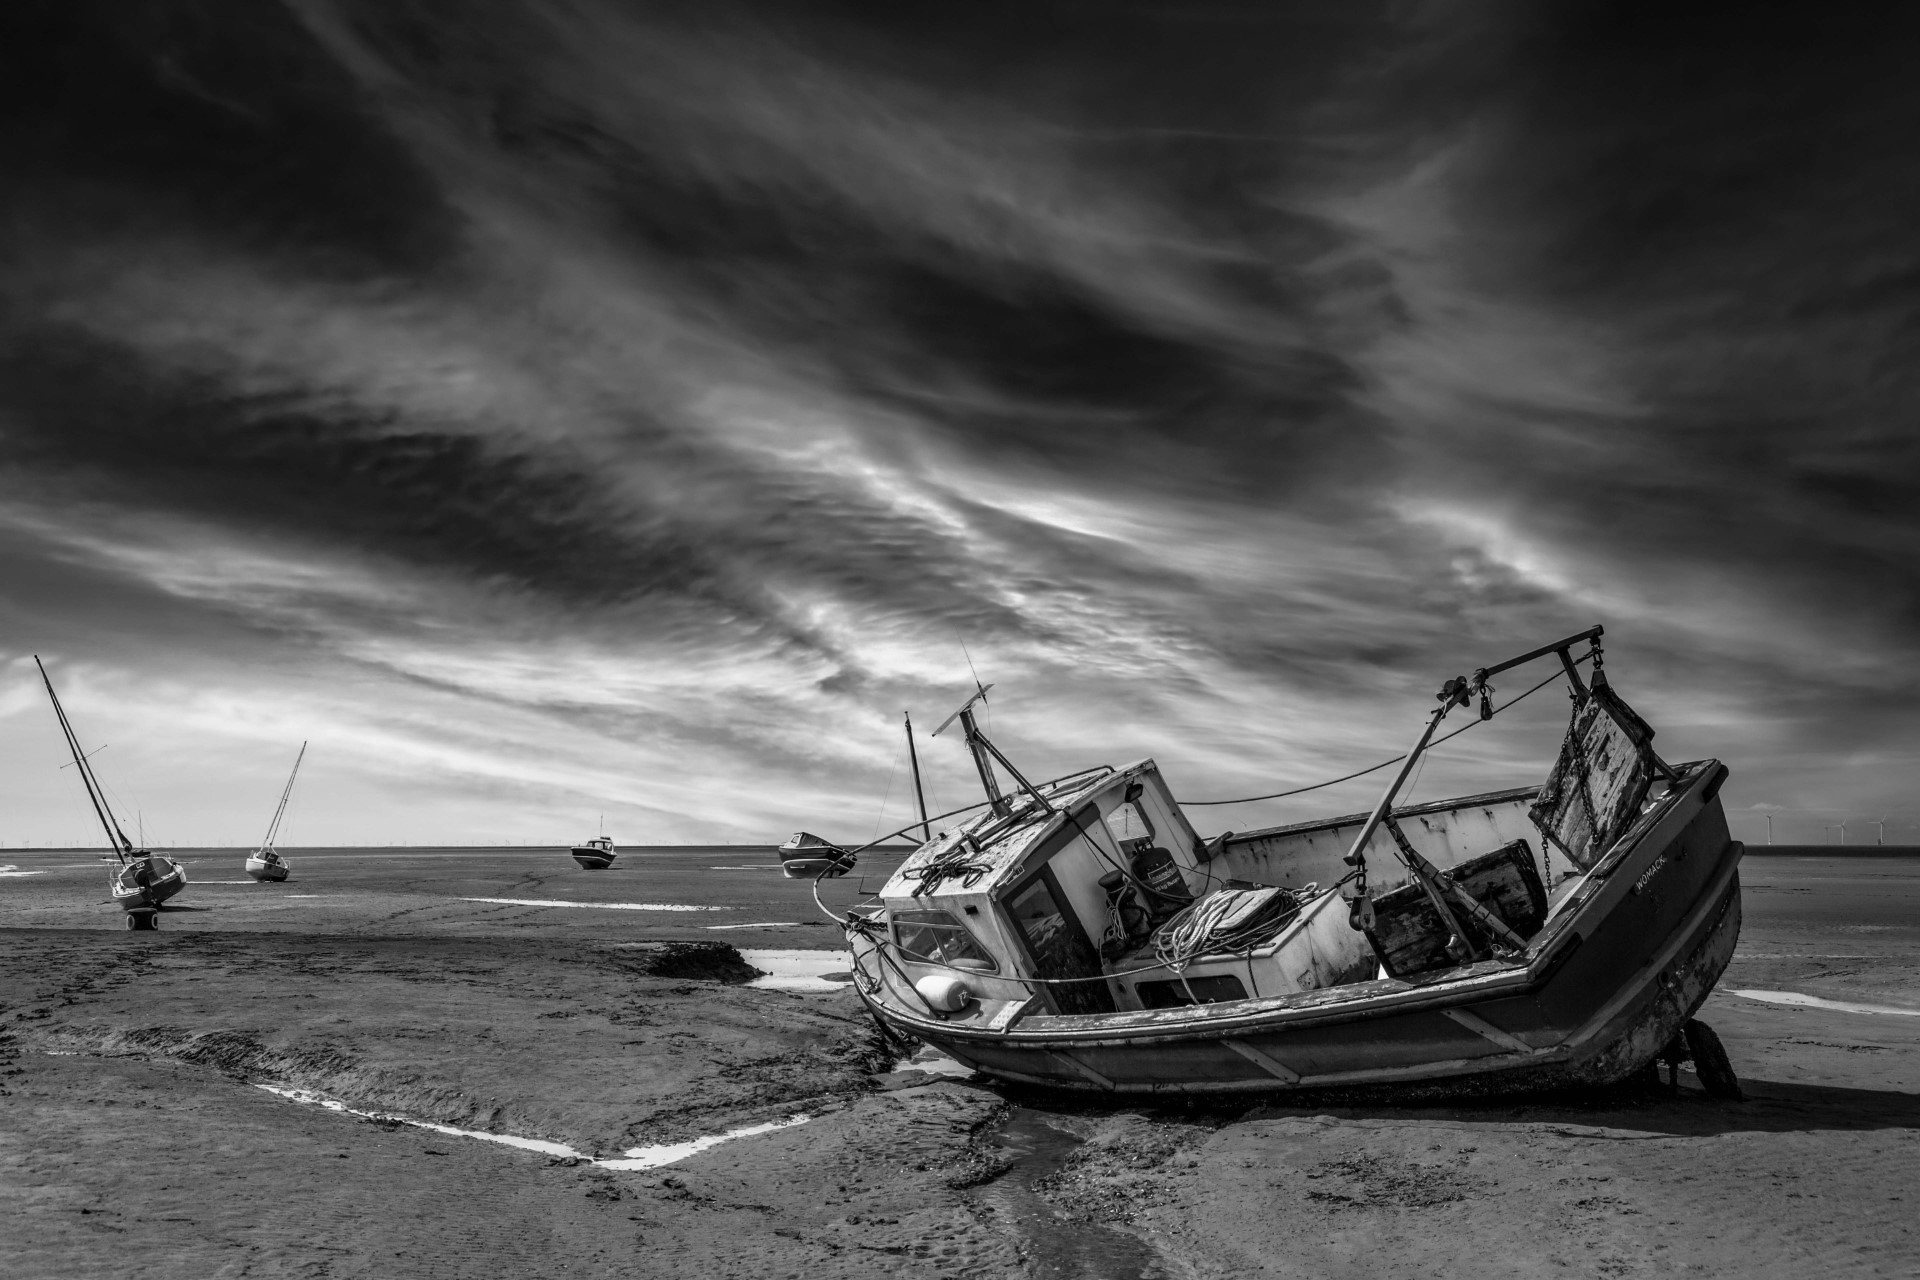 Last ship at Meols, Wirral - Last years exhibition in Leedsand this years exhibition in May at Coningsby Gallery in London (also exhibited in Budapest, Athens, Melbourne, Montreal and Barcelona)